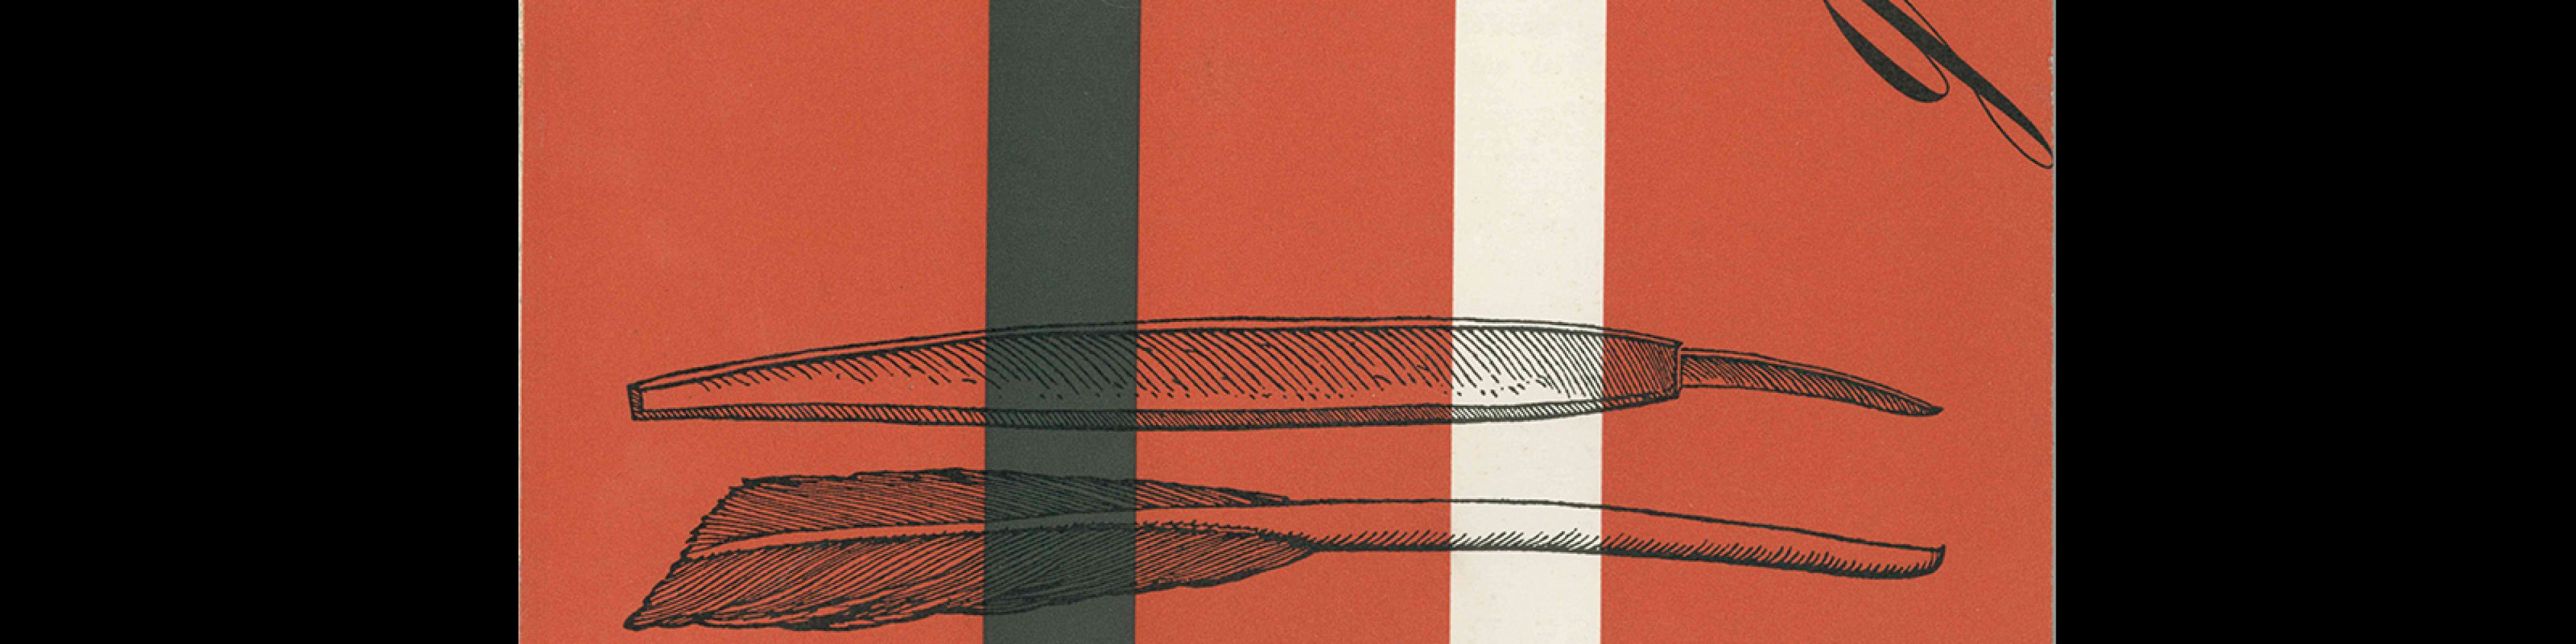 Graphis 15, 1946. Cover design by Paul Sollberger